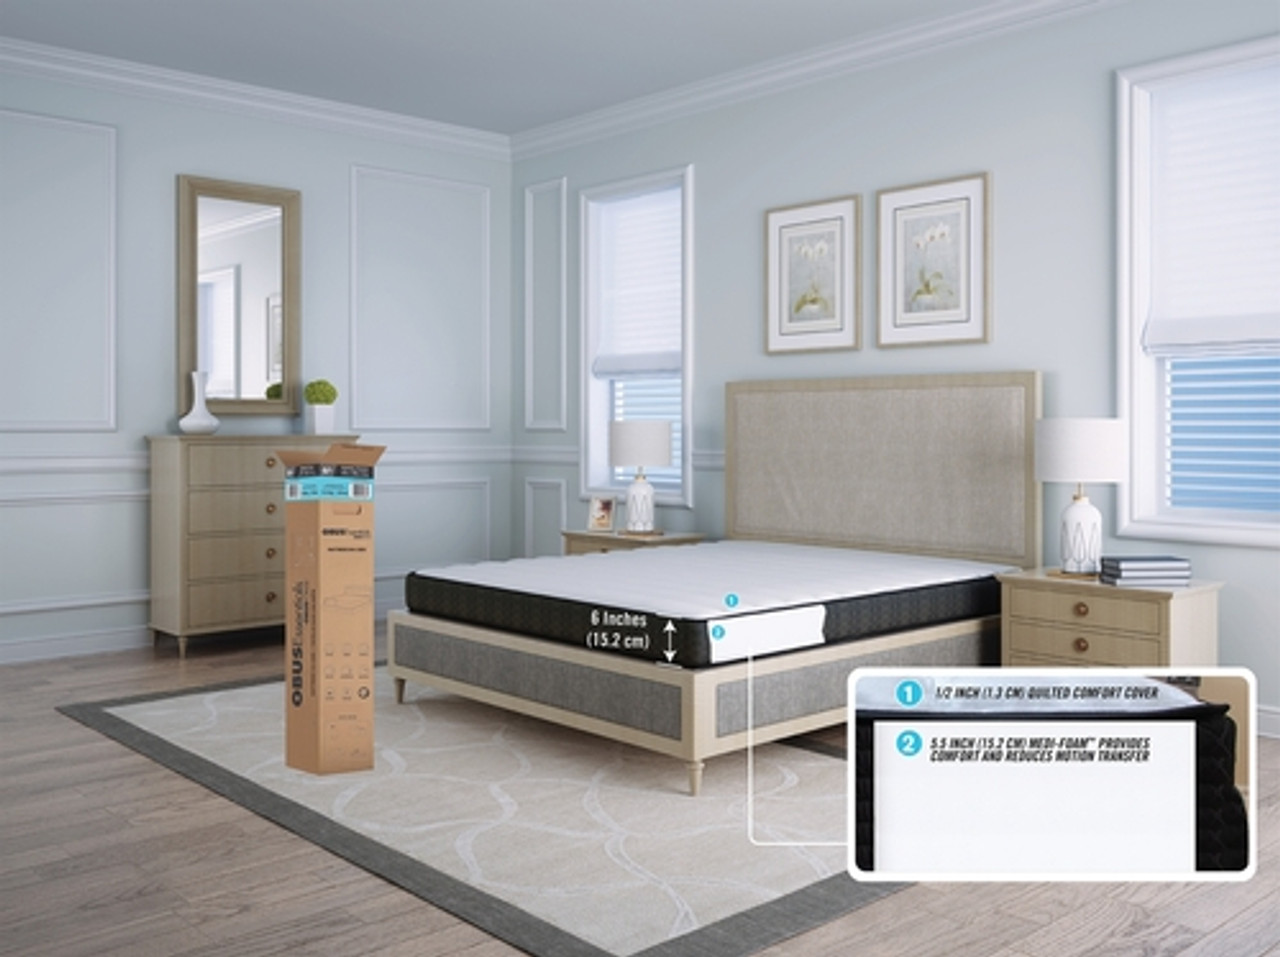 ObusForme MTE-FM6-TW ObusEssentials Comfort Series 6” MEDI-GEL cooled bed in the box Mattress, Twin